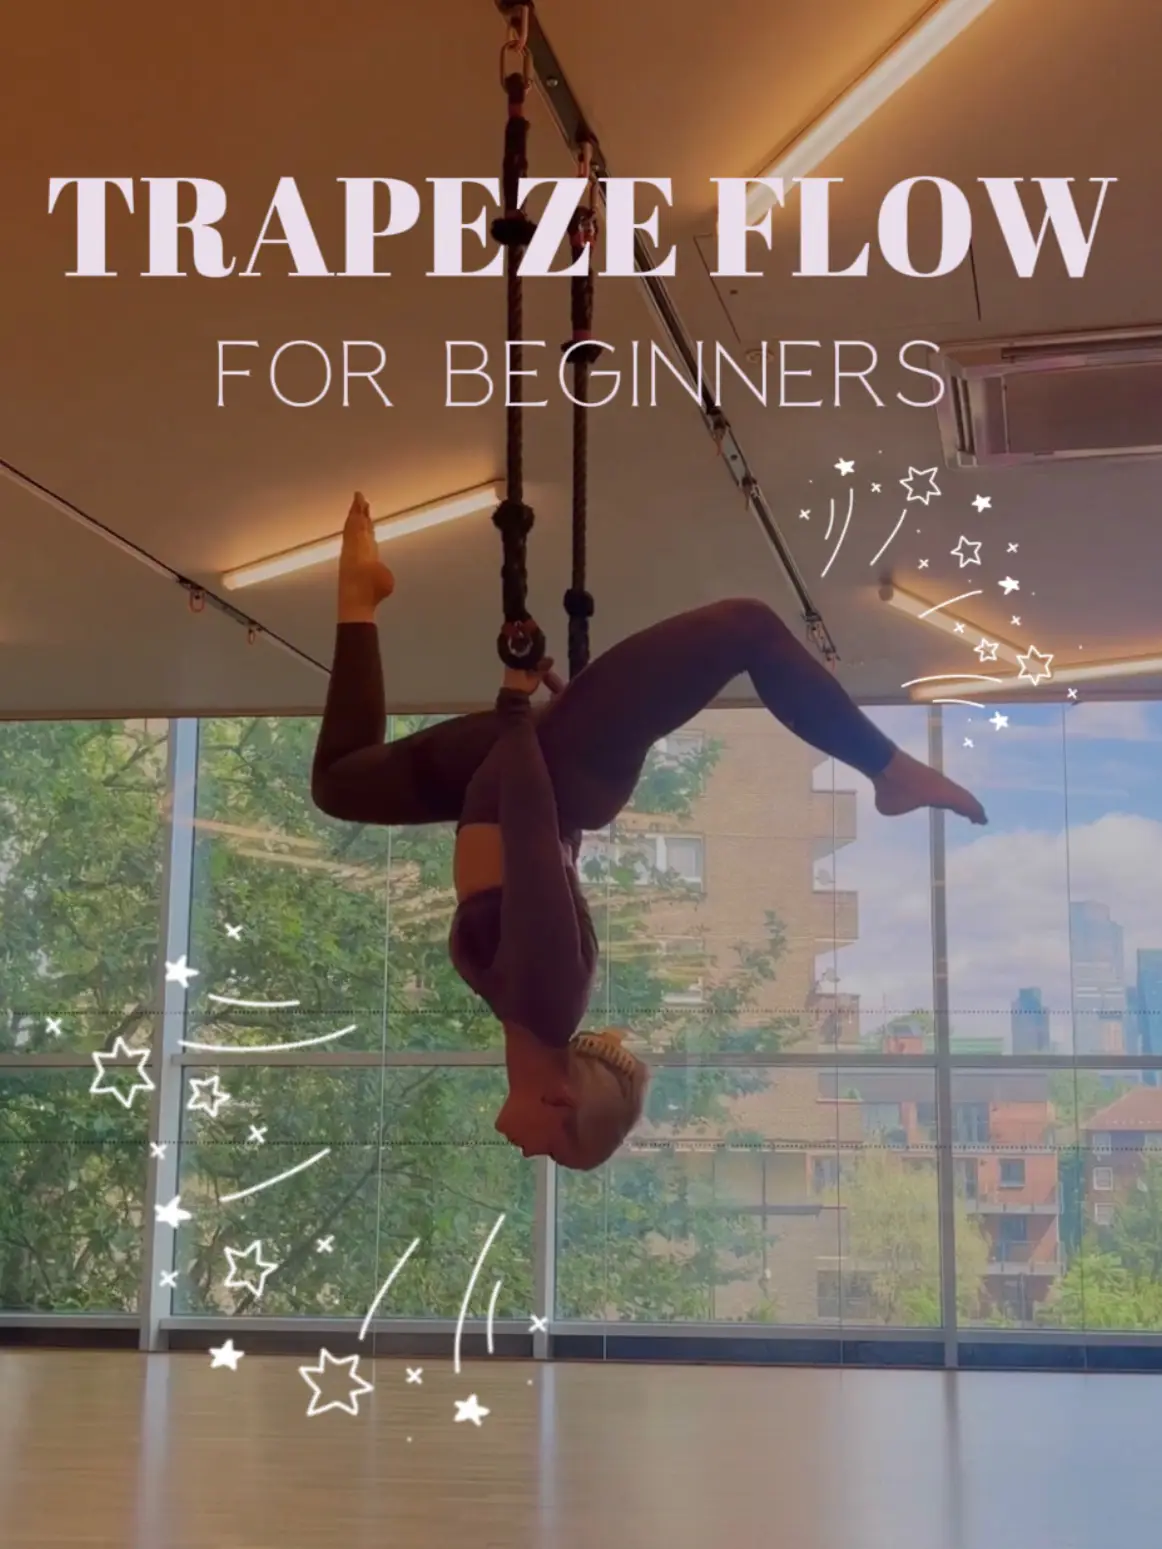 Easy Trapeze Flow for Beginners! 🎪✨, Video published by Han 👻